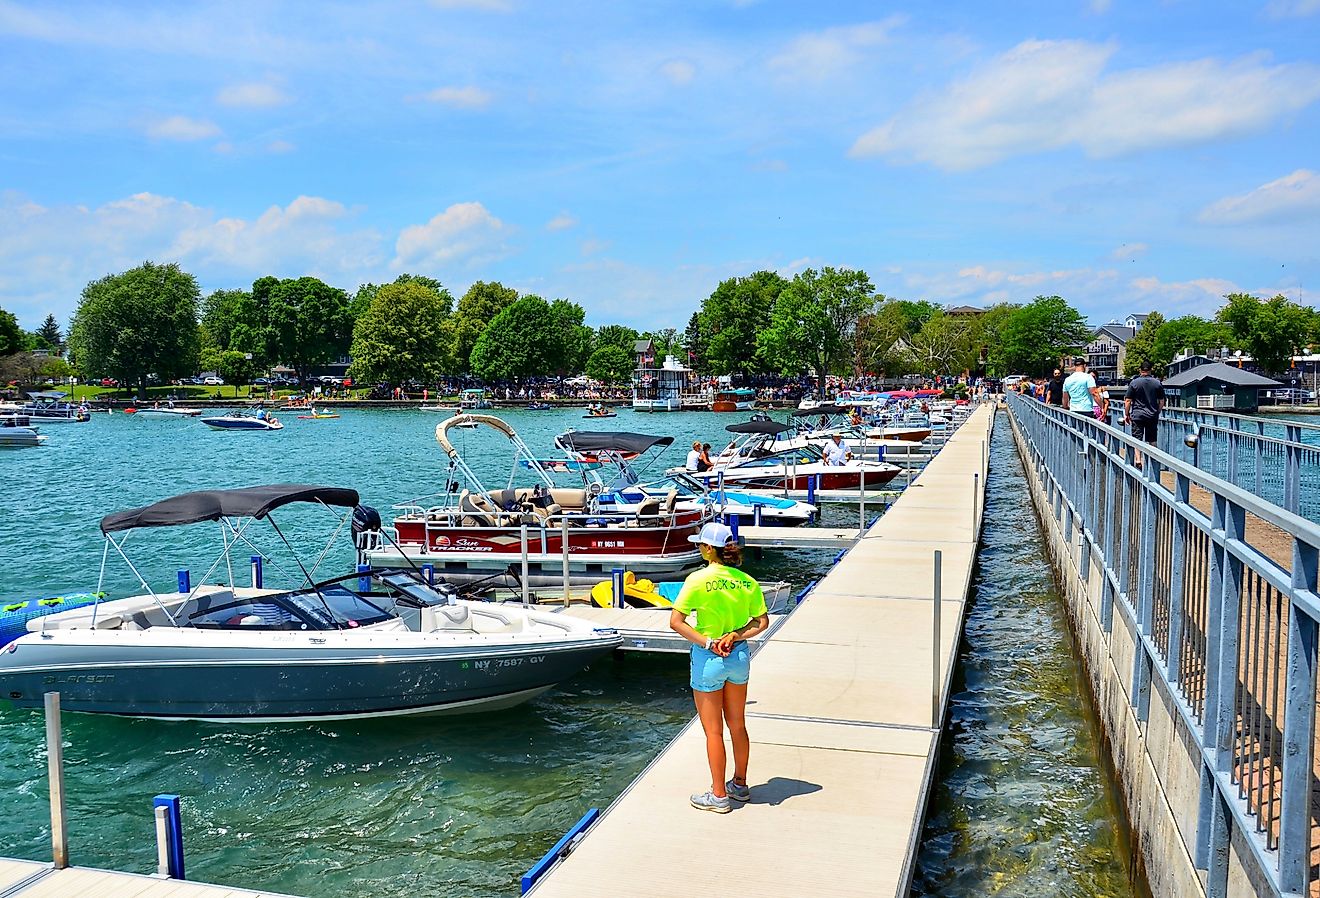 Pier and luxury boats docked in the Skaneateles Lake, New York. Image credit PQK via Shutterstock